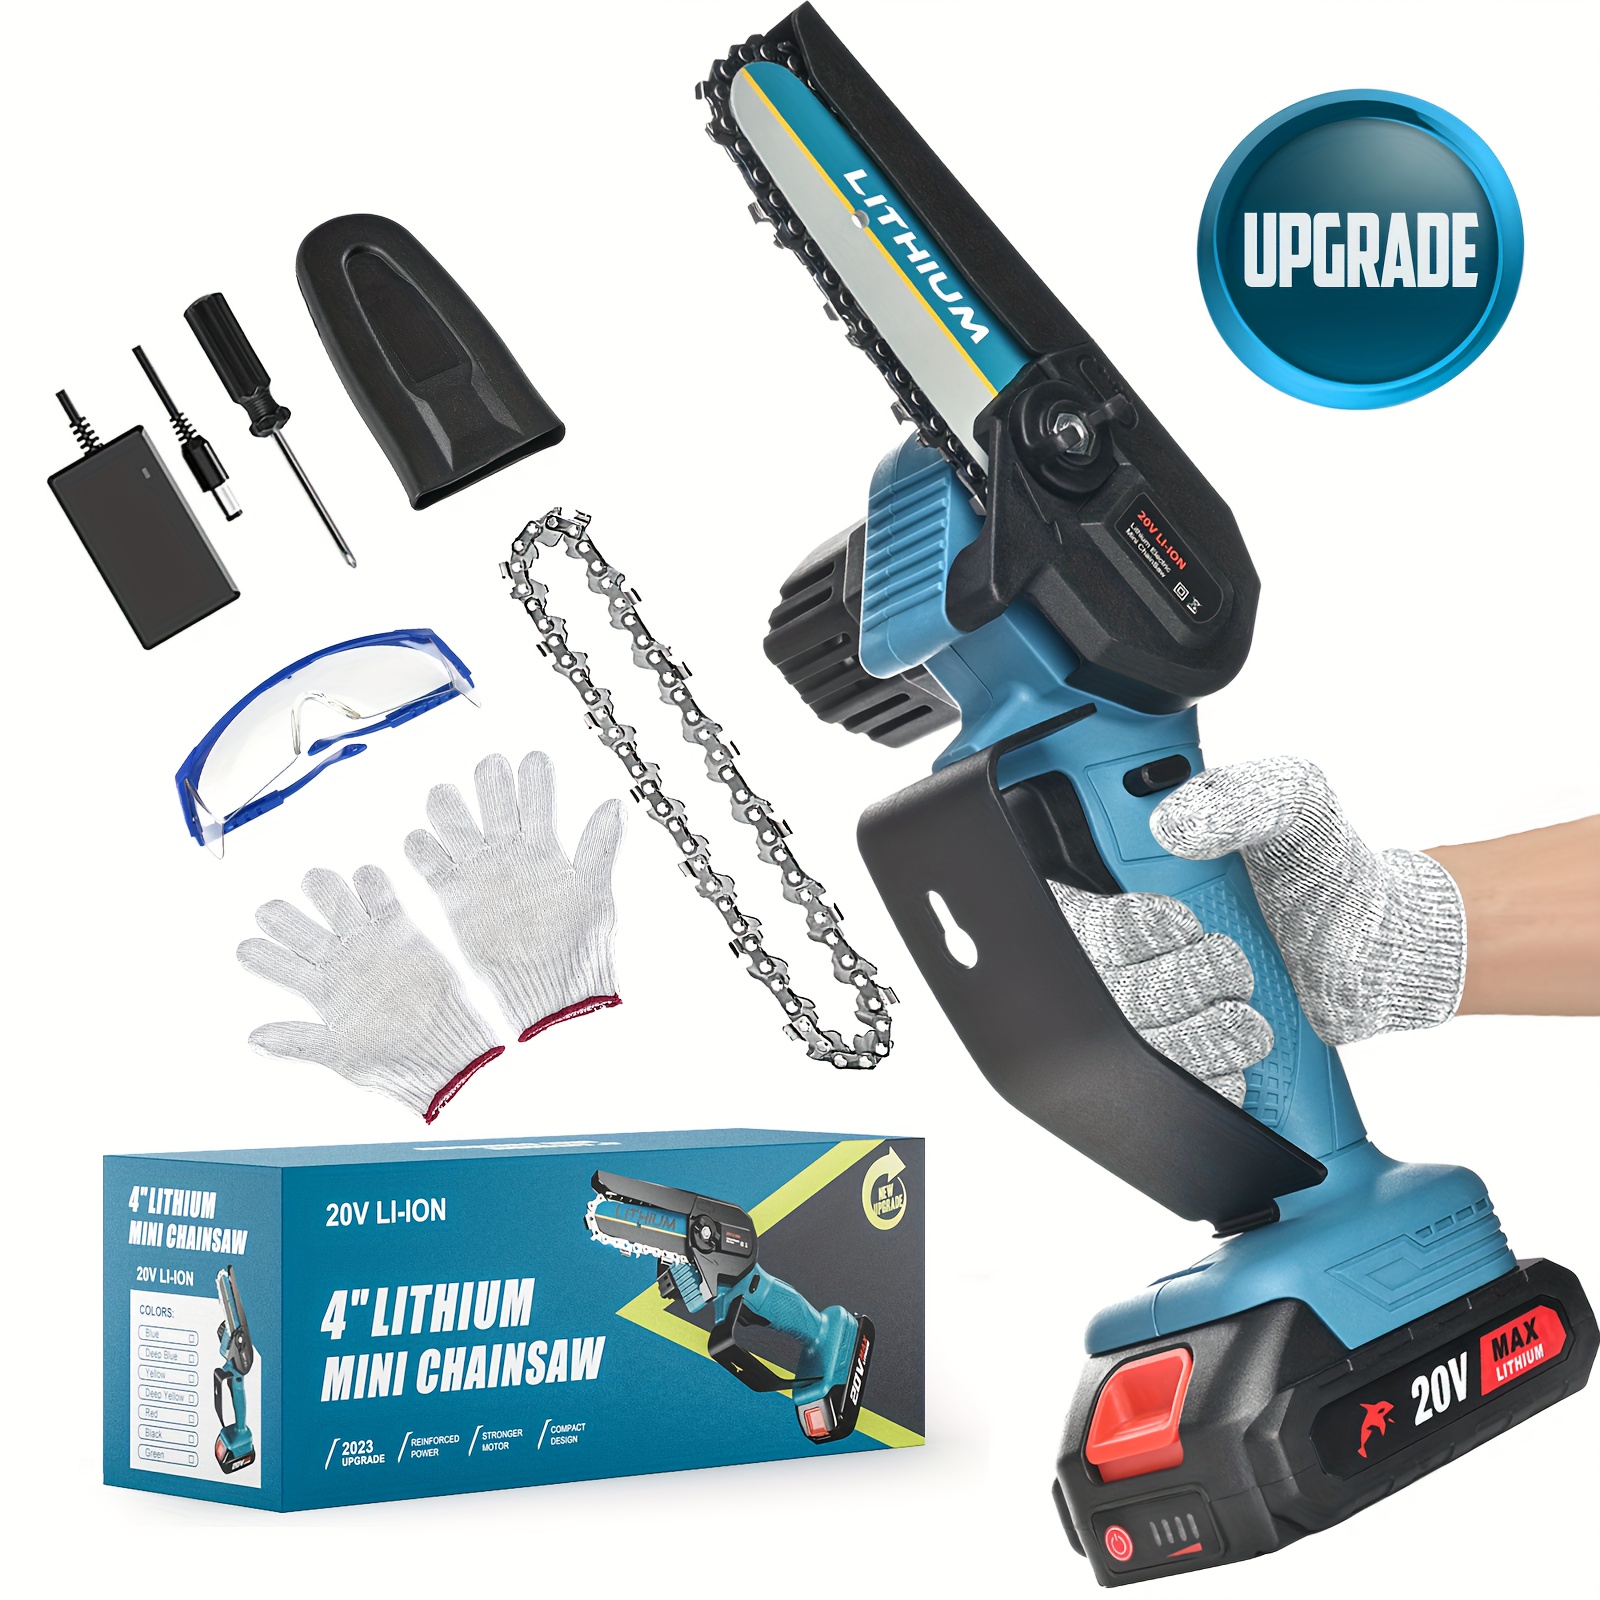 

4" Cordless Mini Chainsaw - Portable Battery Powered Kit, Ultra Light Handheld Chainsaw With Accessories For Precision Pruning And Wood Cutting